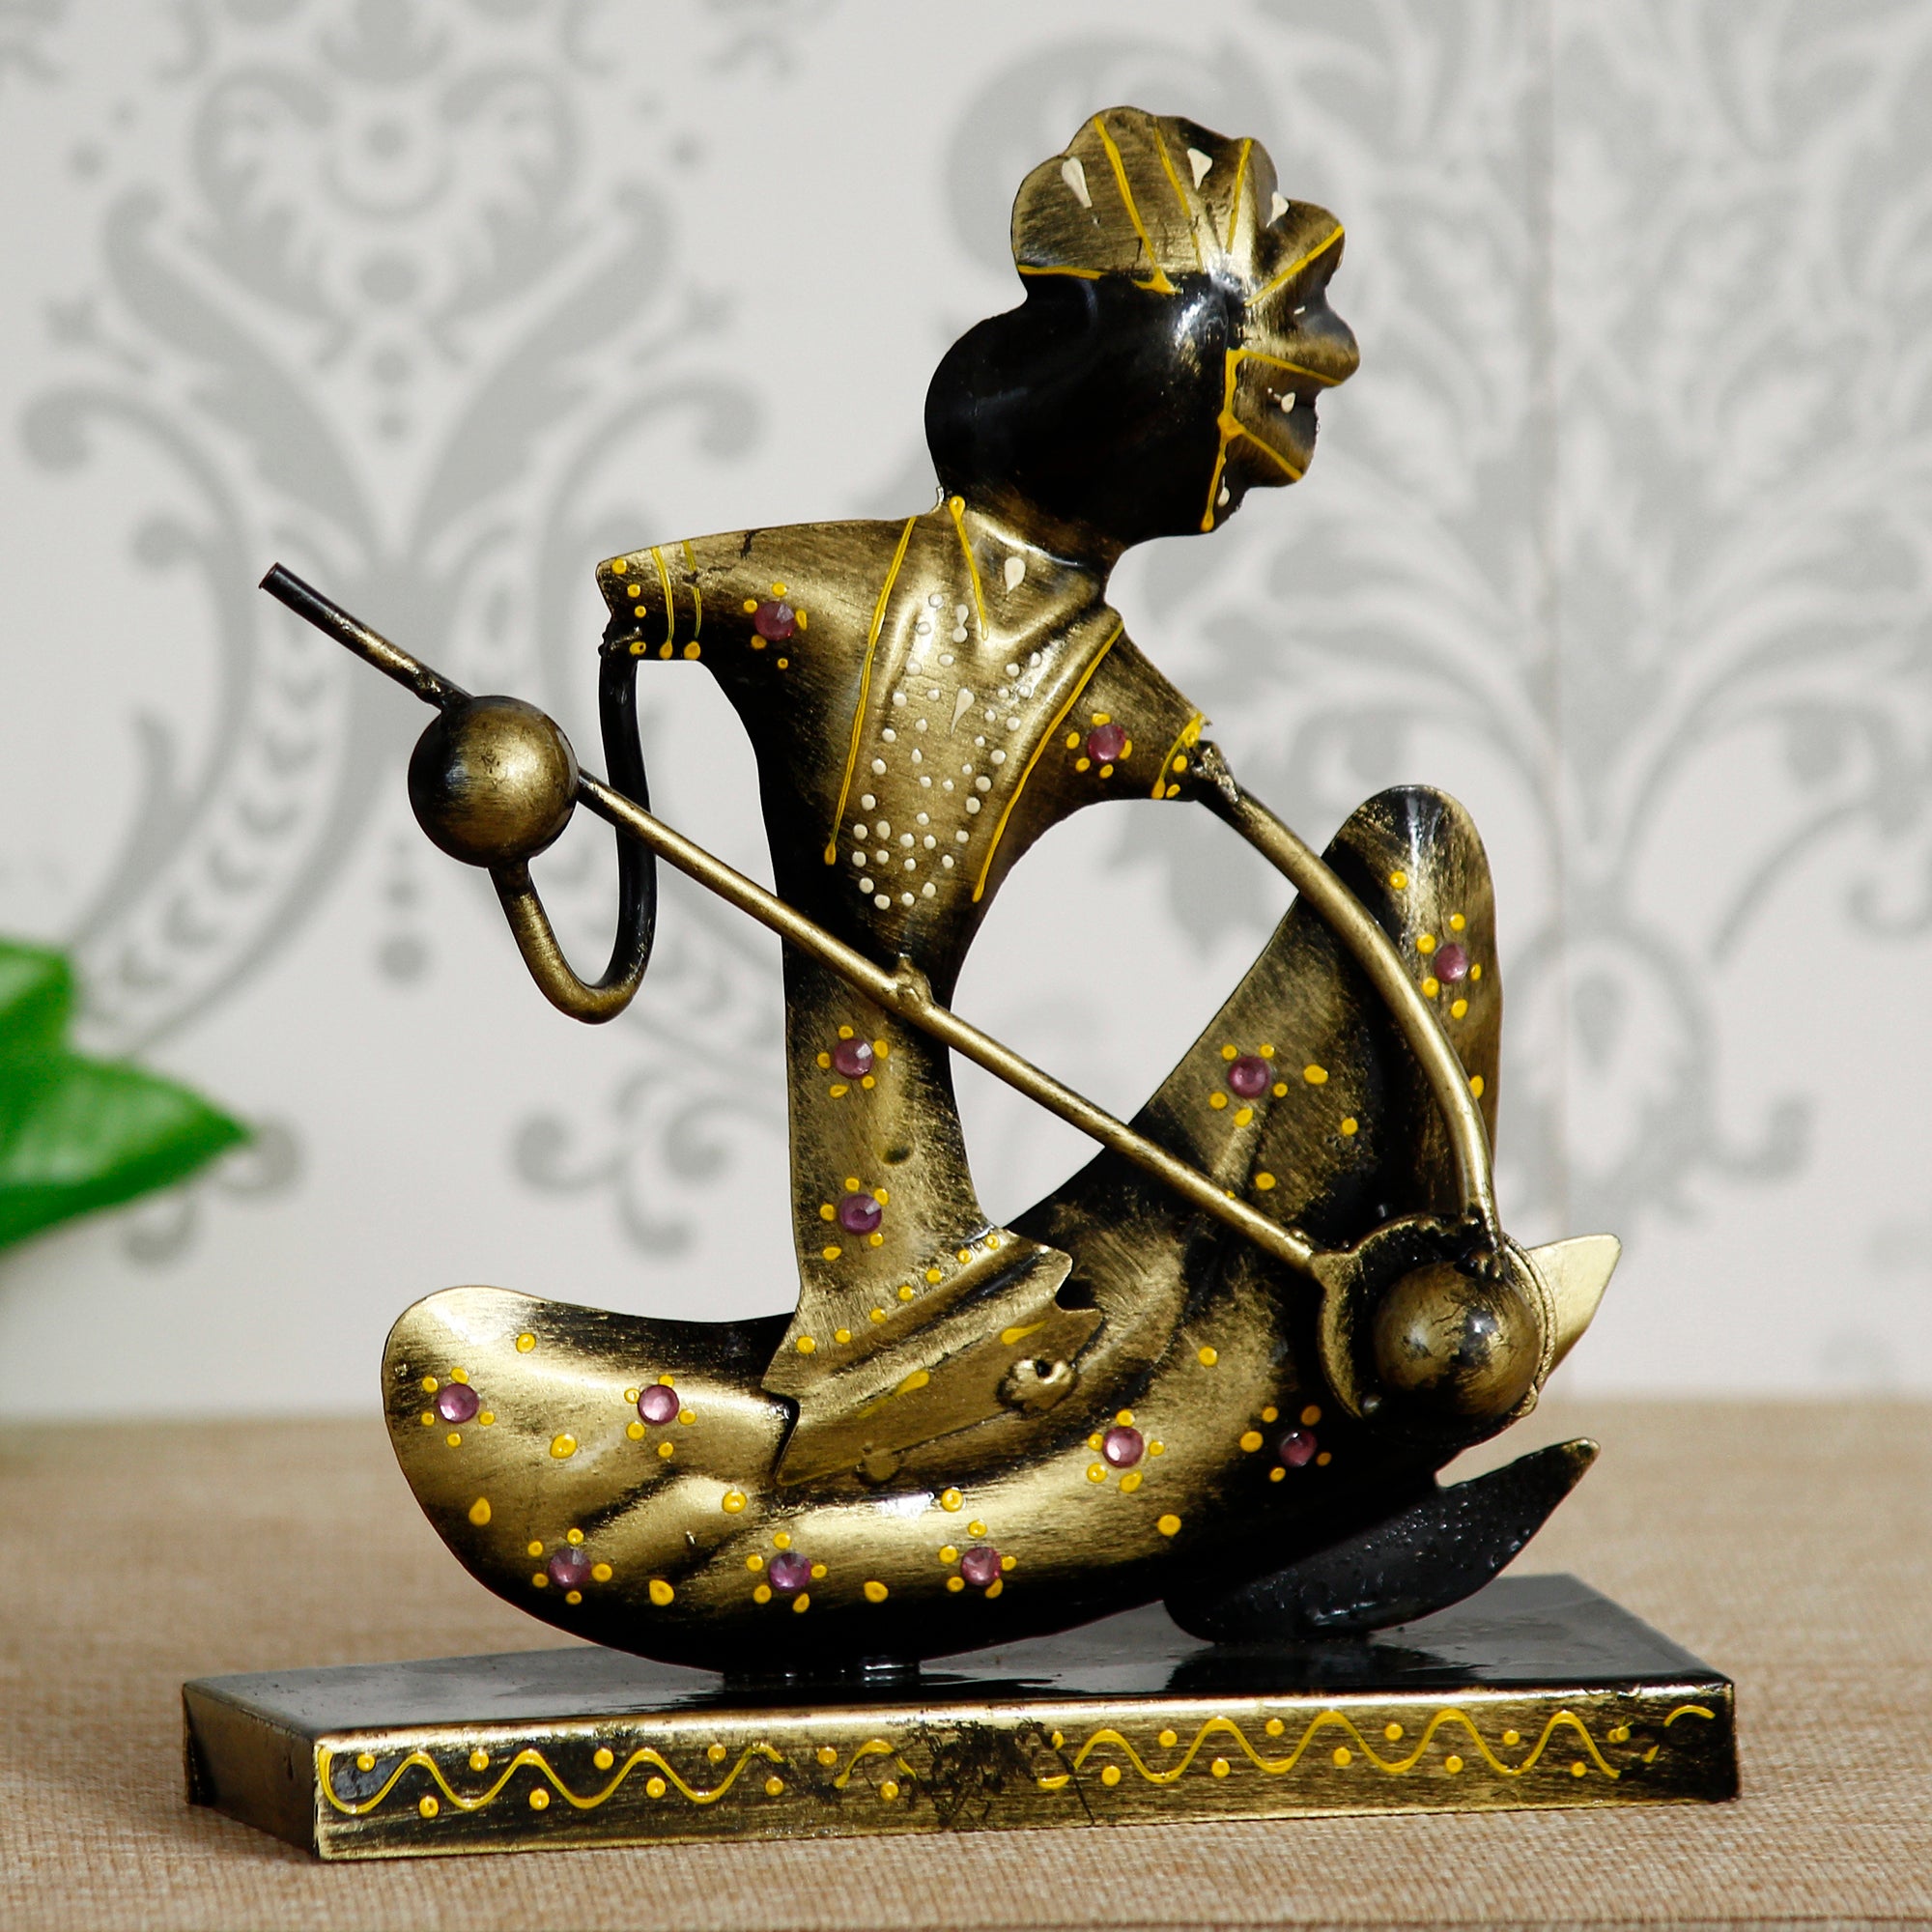 Iron Tribal Man Figurine with Paghdi Playing Banjo Musical Instrument Decorative Showpiece (Golden and Black)